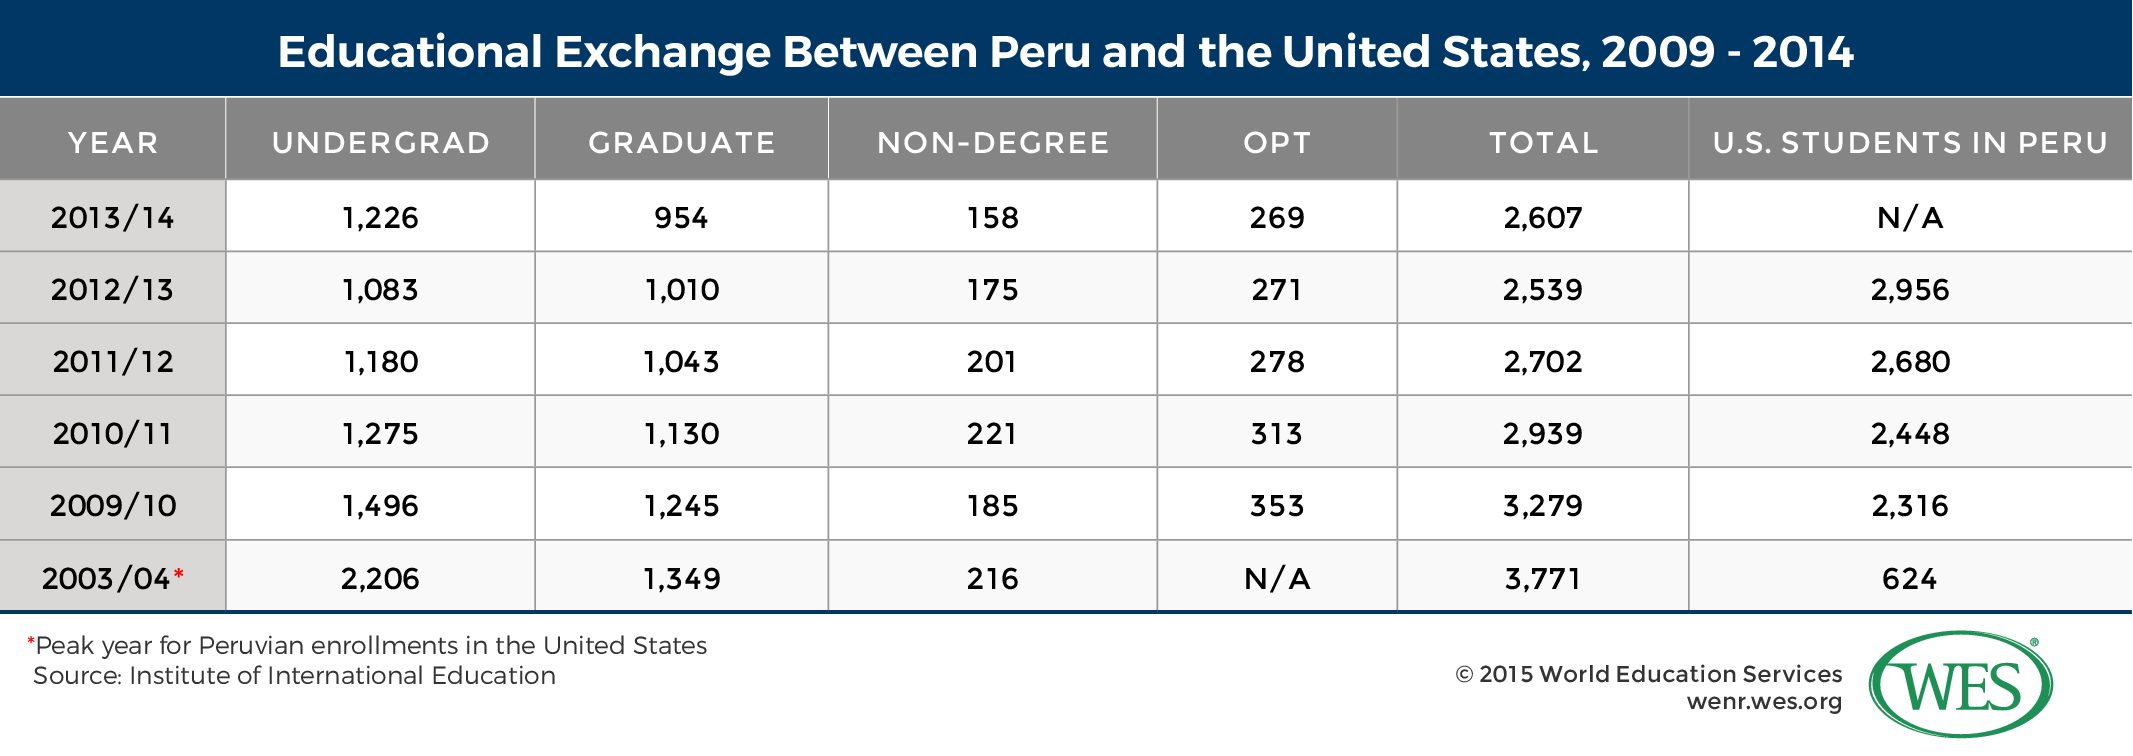 A table showing educational exchange between Peru and the U.S. in select years between 2003/04 and 2013/14. 